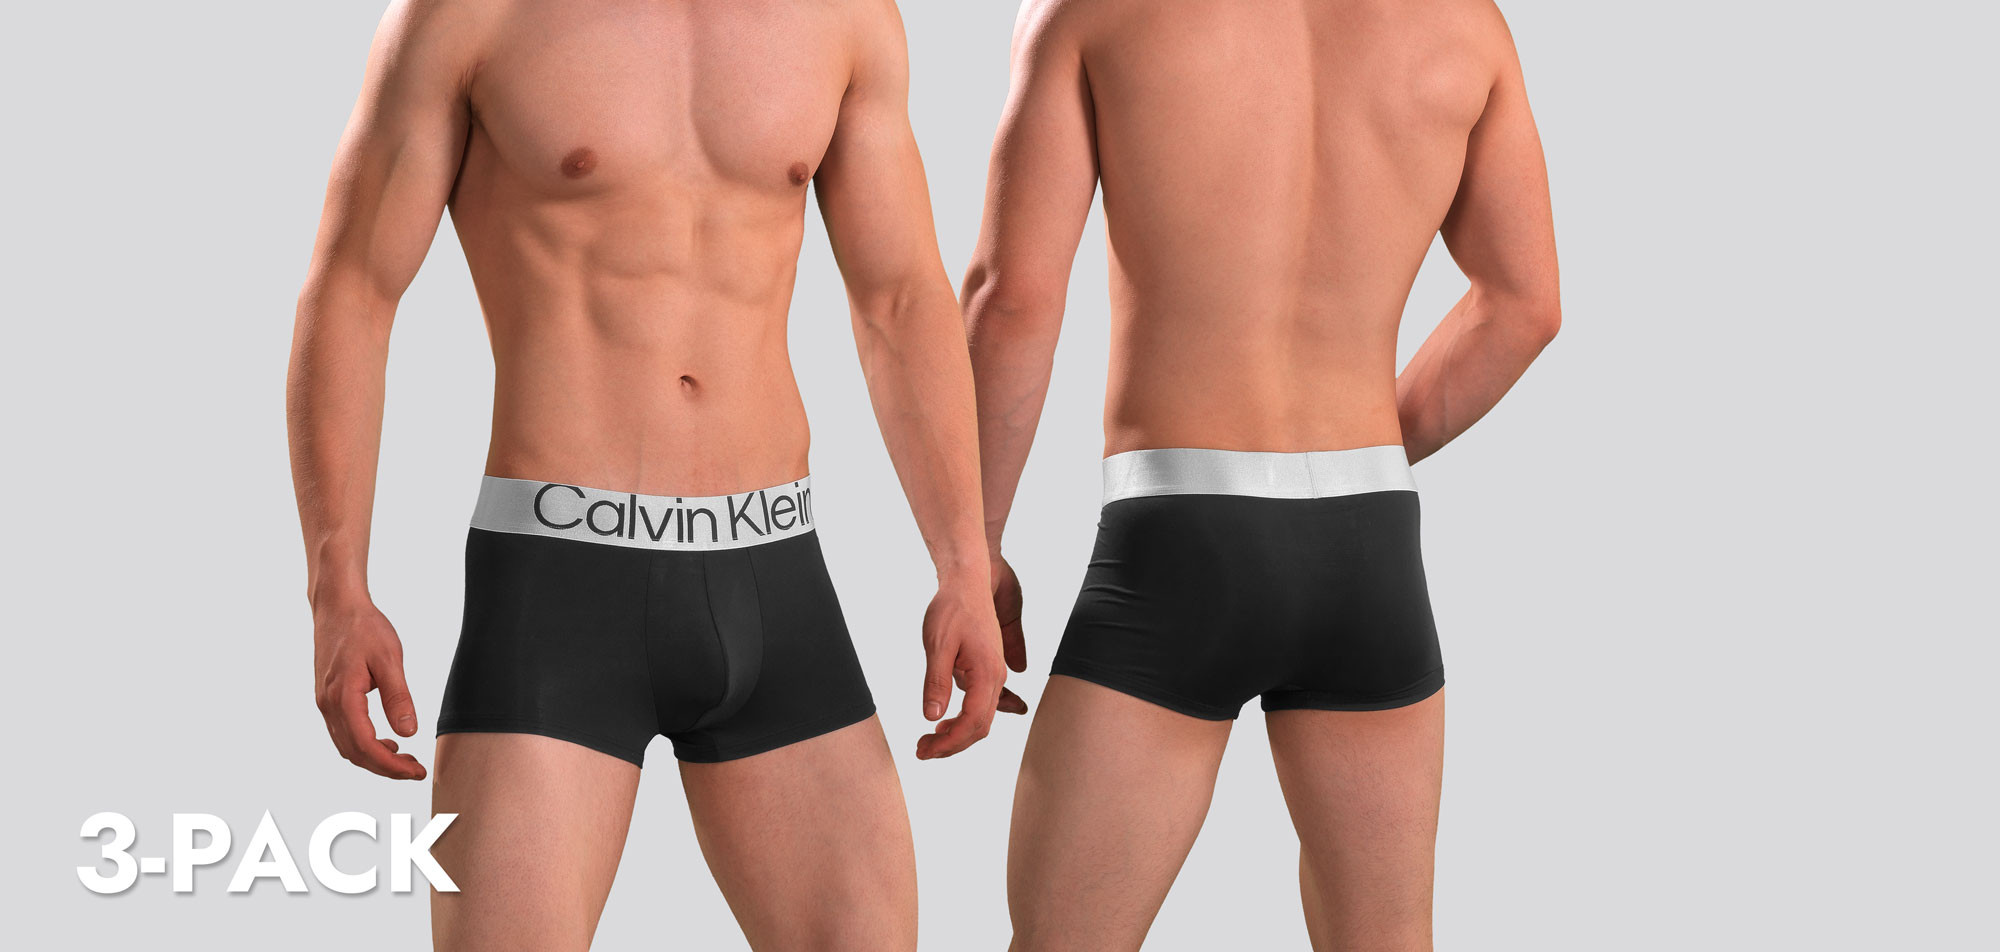 Calvin Klein Low Rise Trunk 3-pack NB3074A Microfiber Reconsidered Steel, color Nee